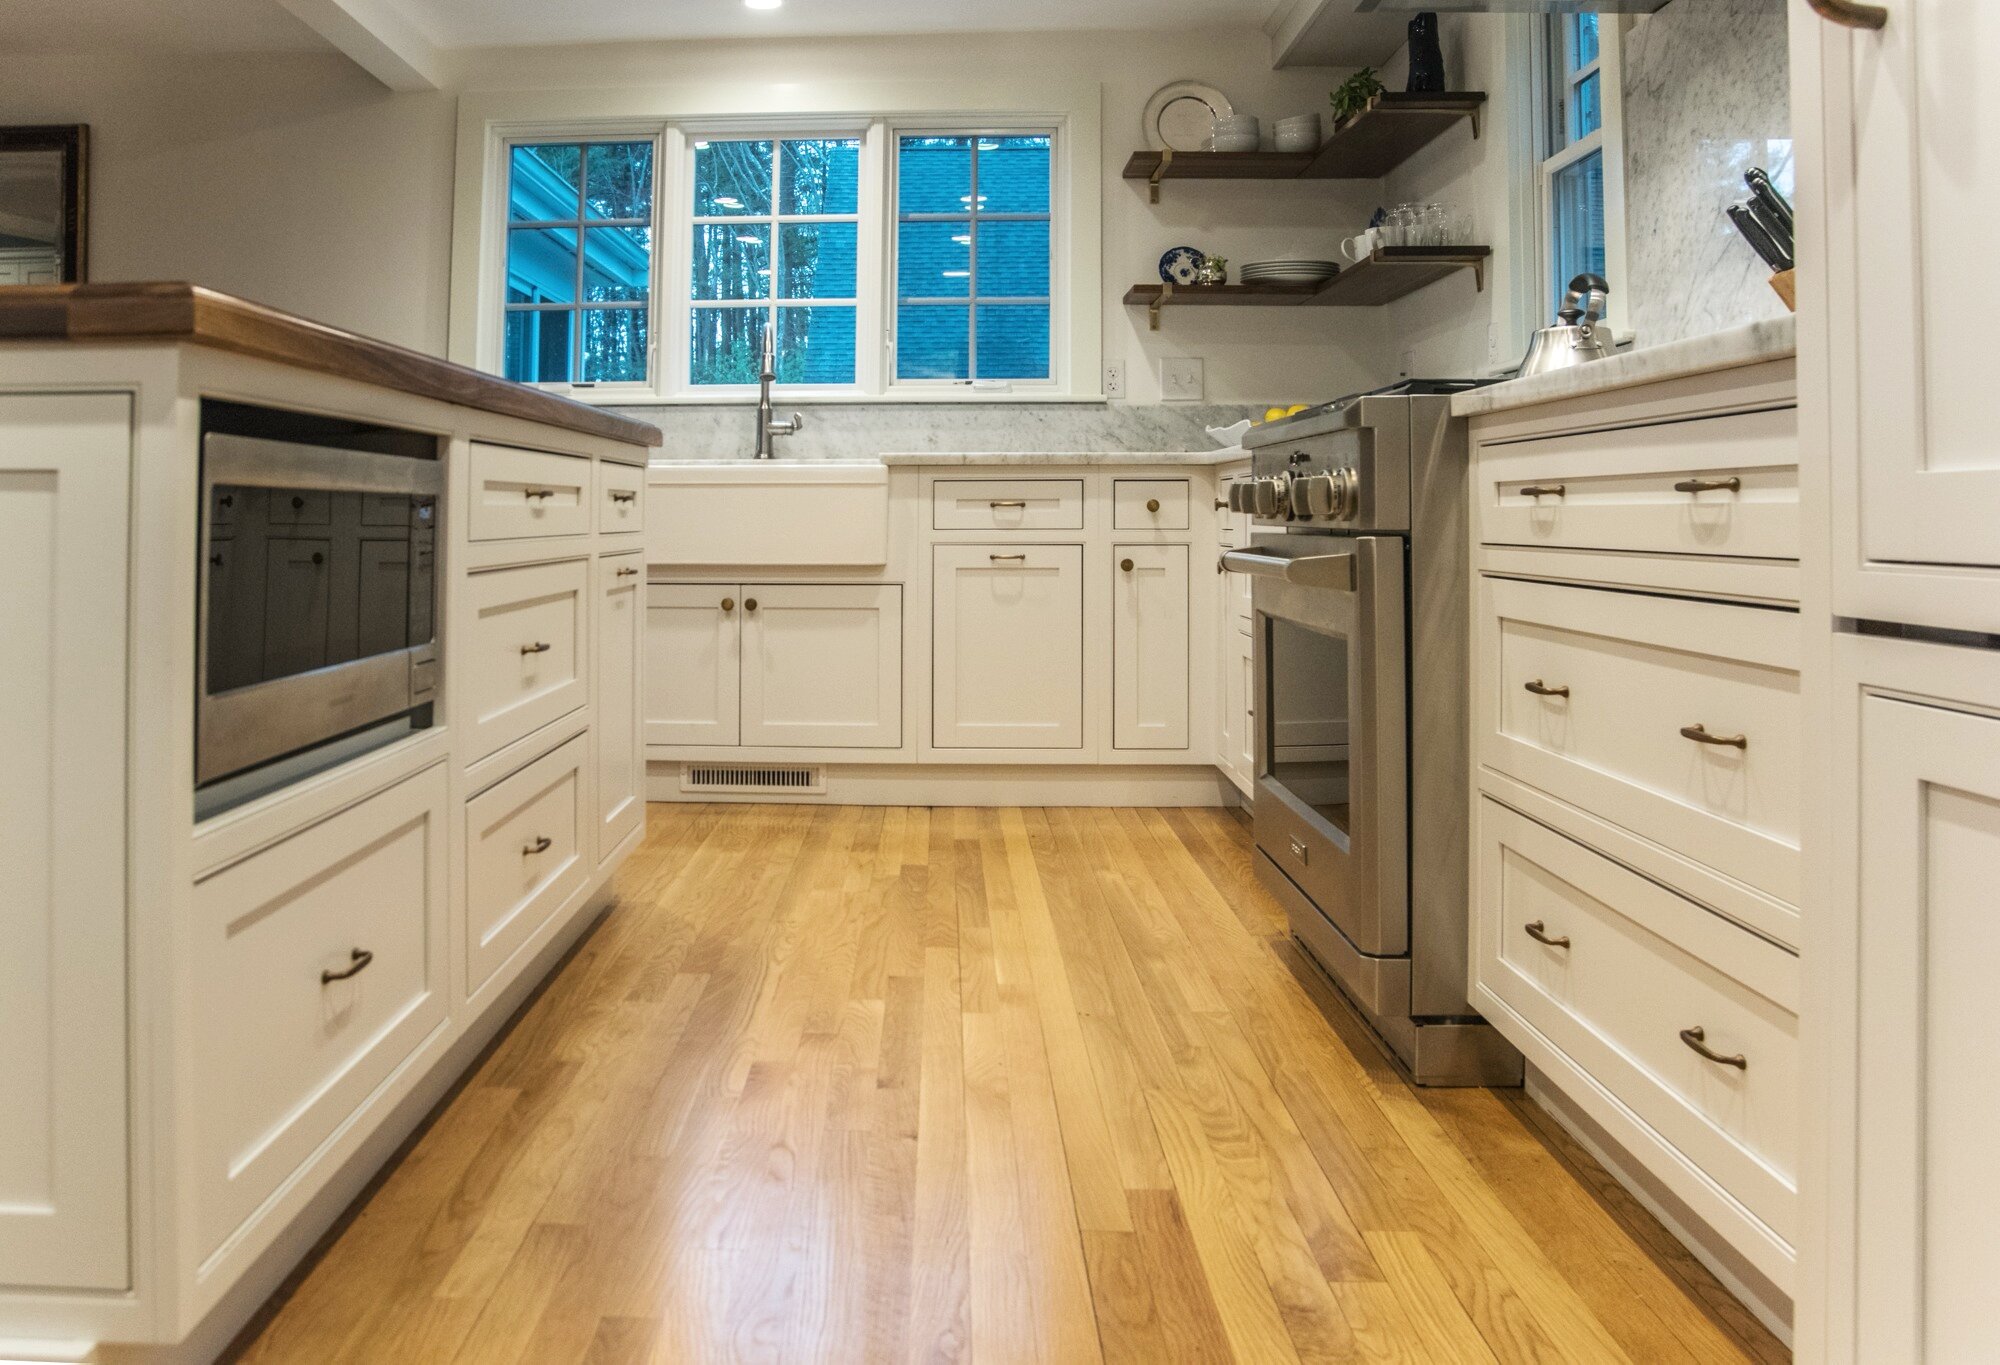 Pullouts Or Drawers In Kitchen Cabinets - Which Is Best? — DESIGNED